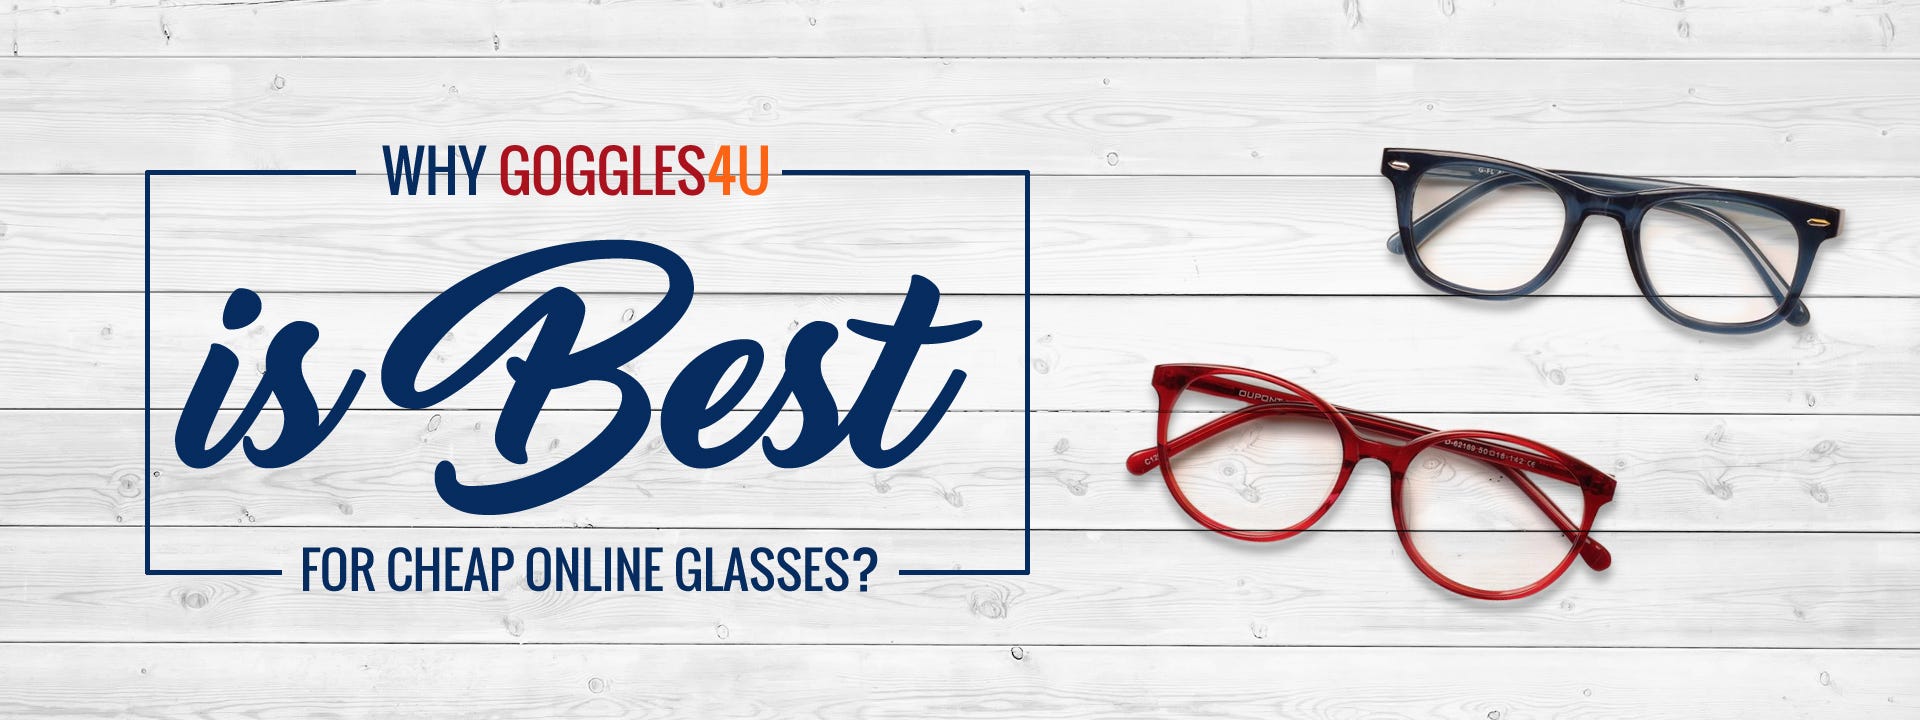 Why Goggles4U Is The Best For Cheap Online Glasses?